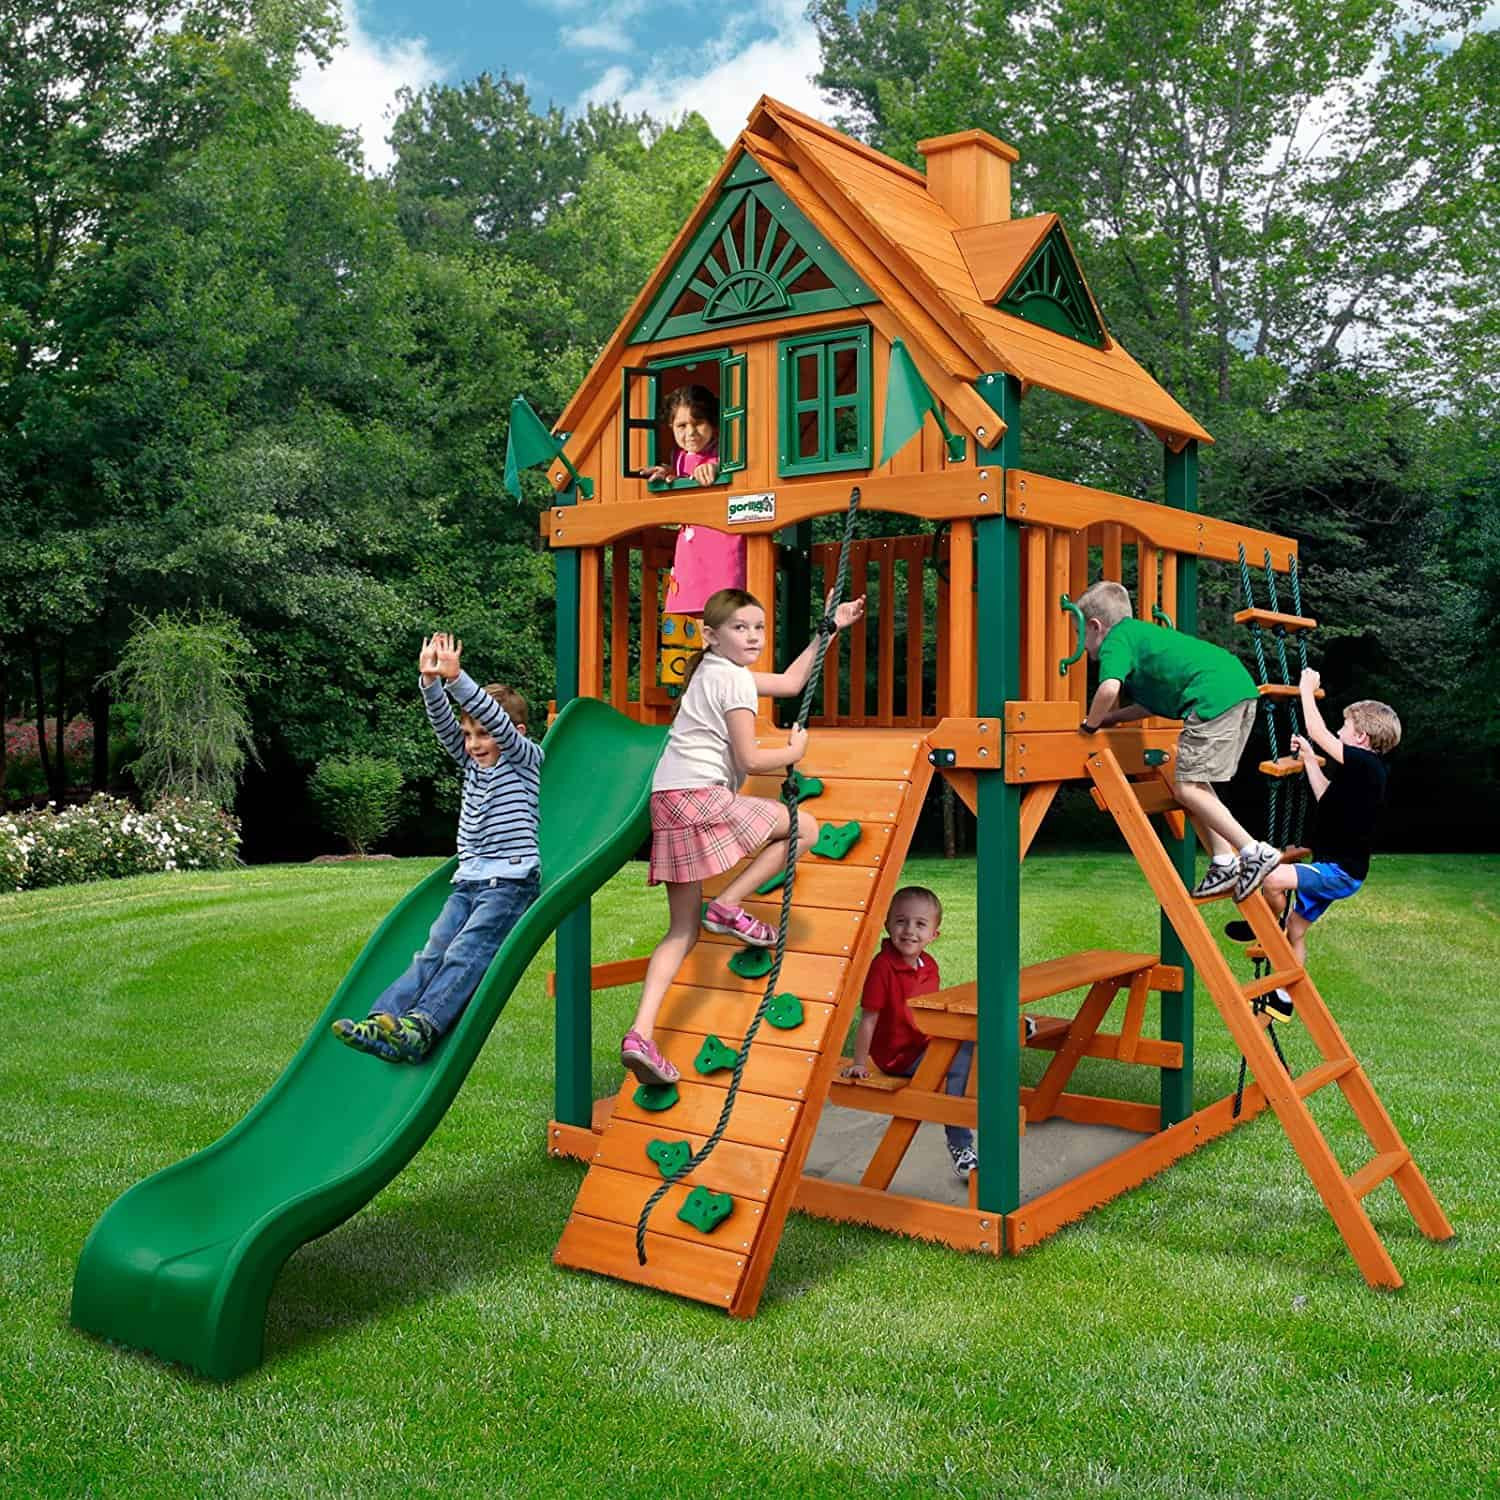 Kids Outdoor Swing Set
 Swing Sets for Small Yards The Backyard Site